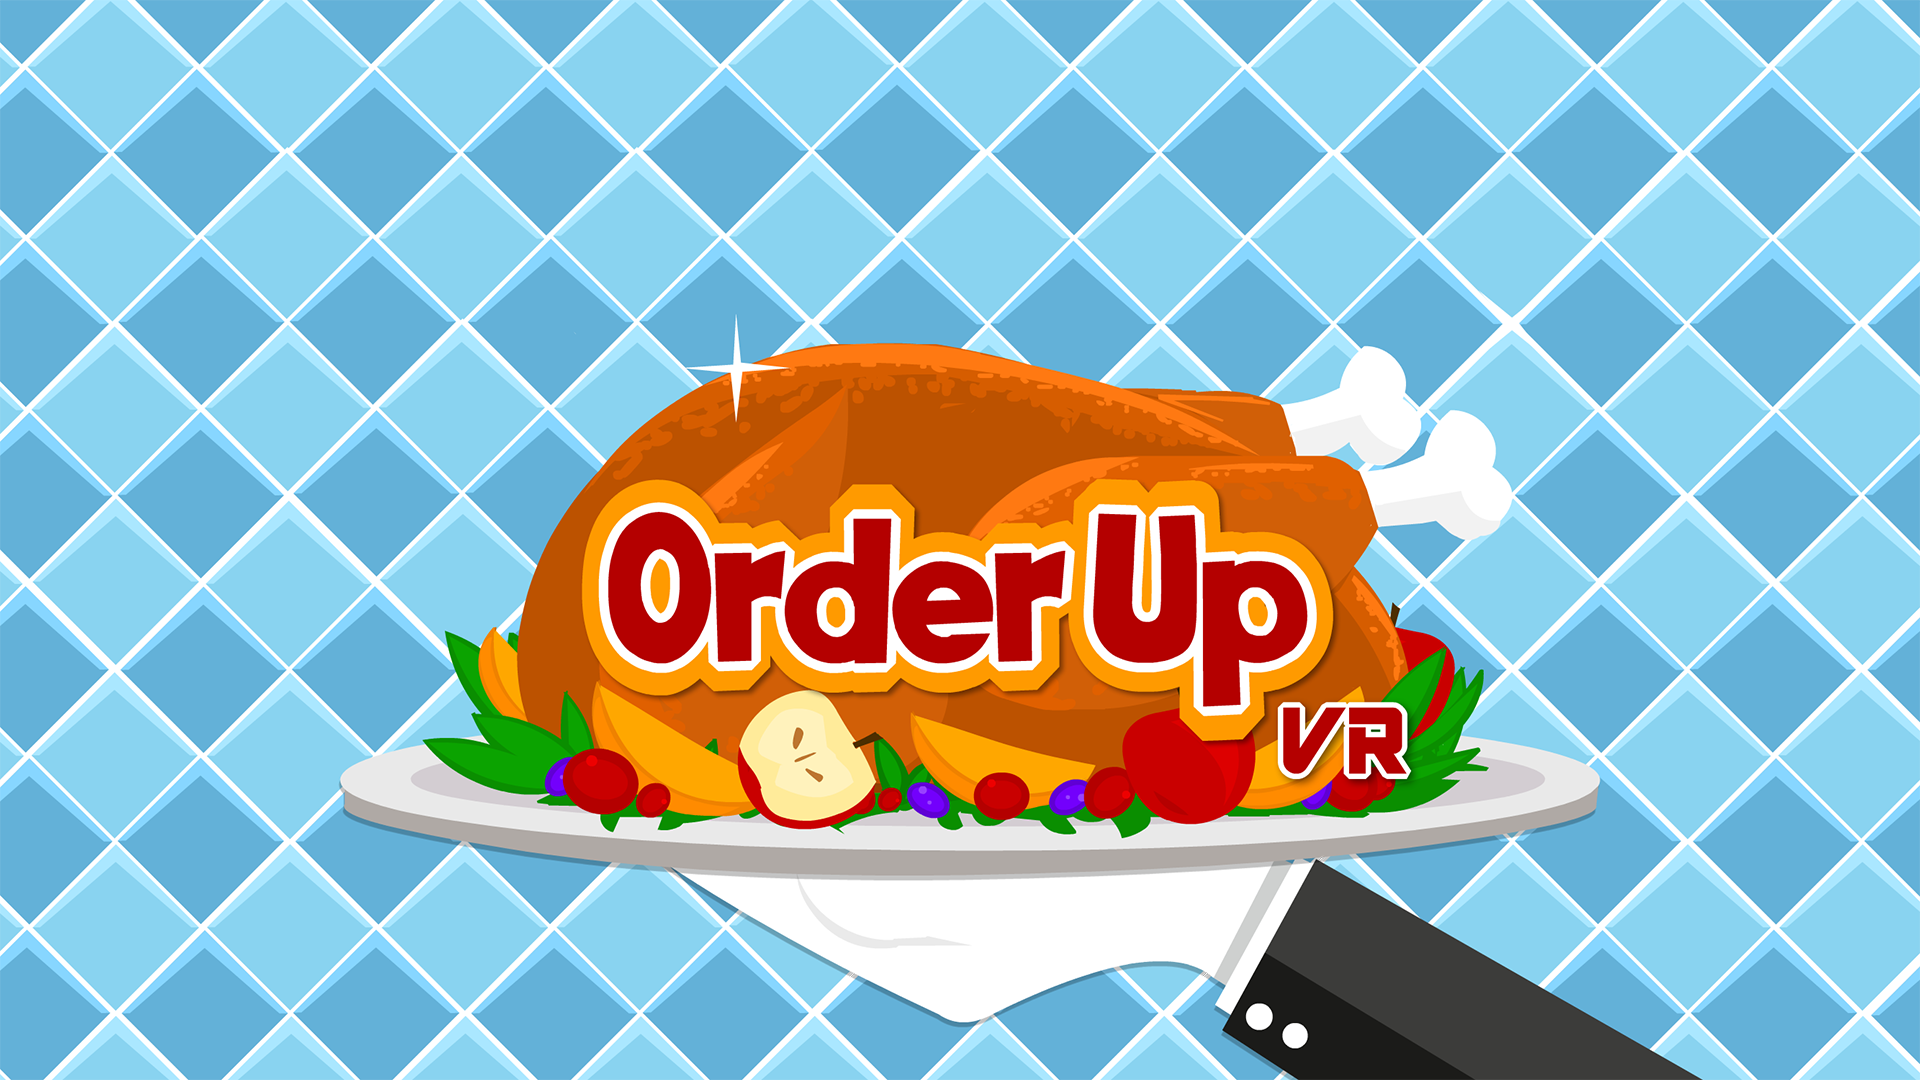 Order up to go. Order up VR. Order up. Out of order game. Order up игра.